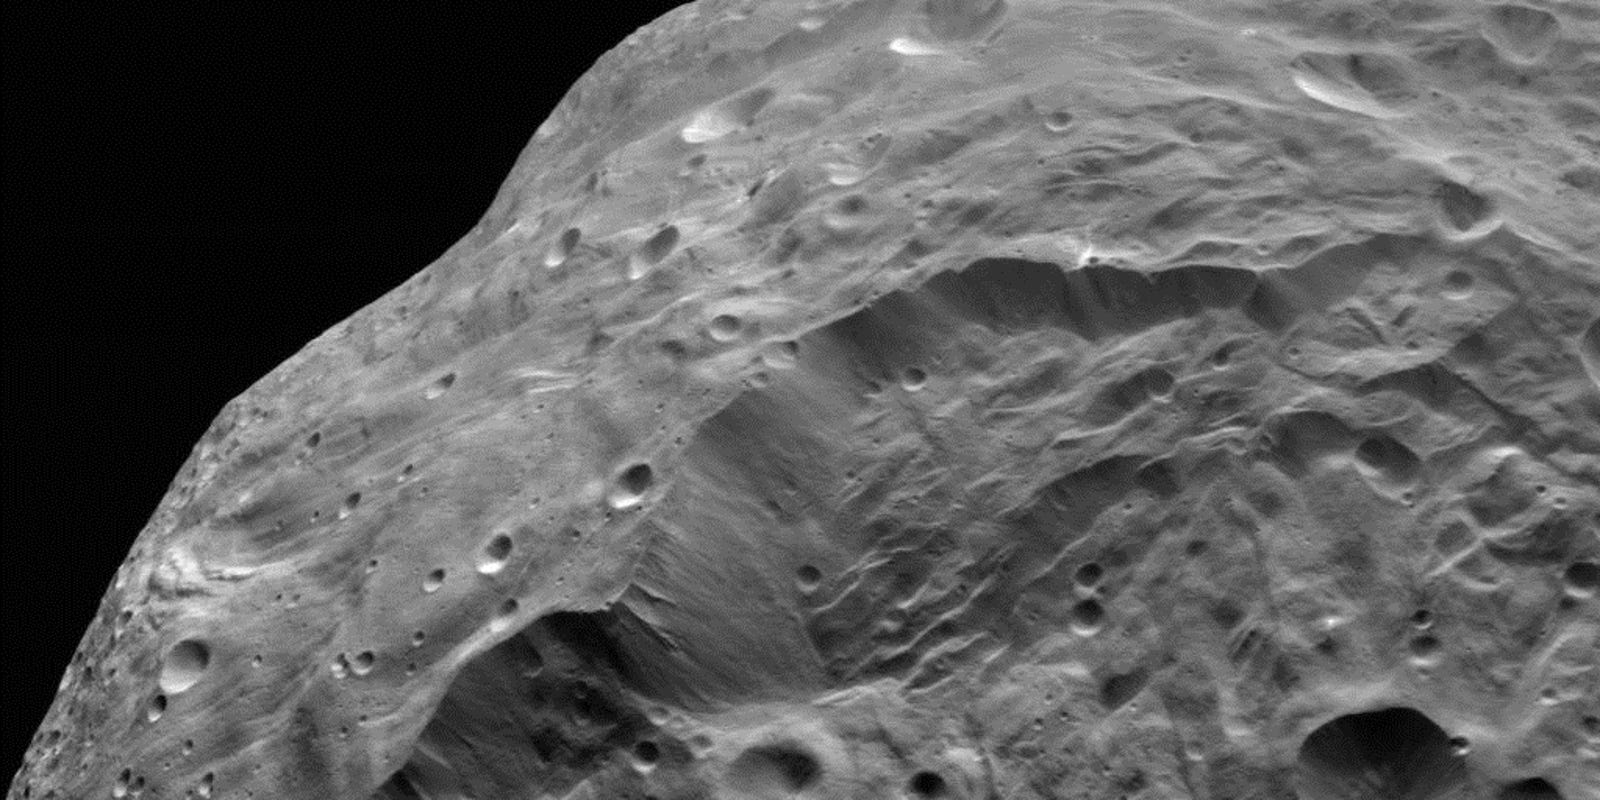 Giant asteroid flyby sets off study